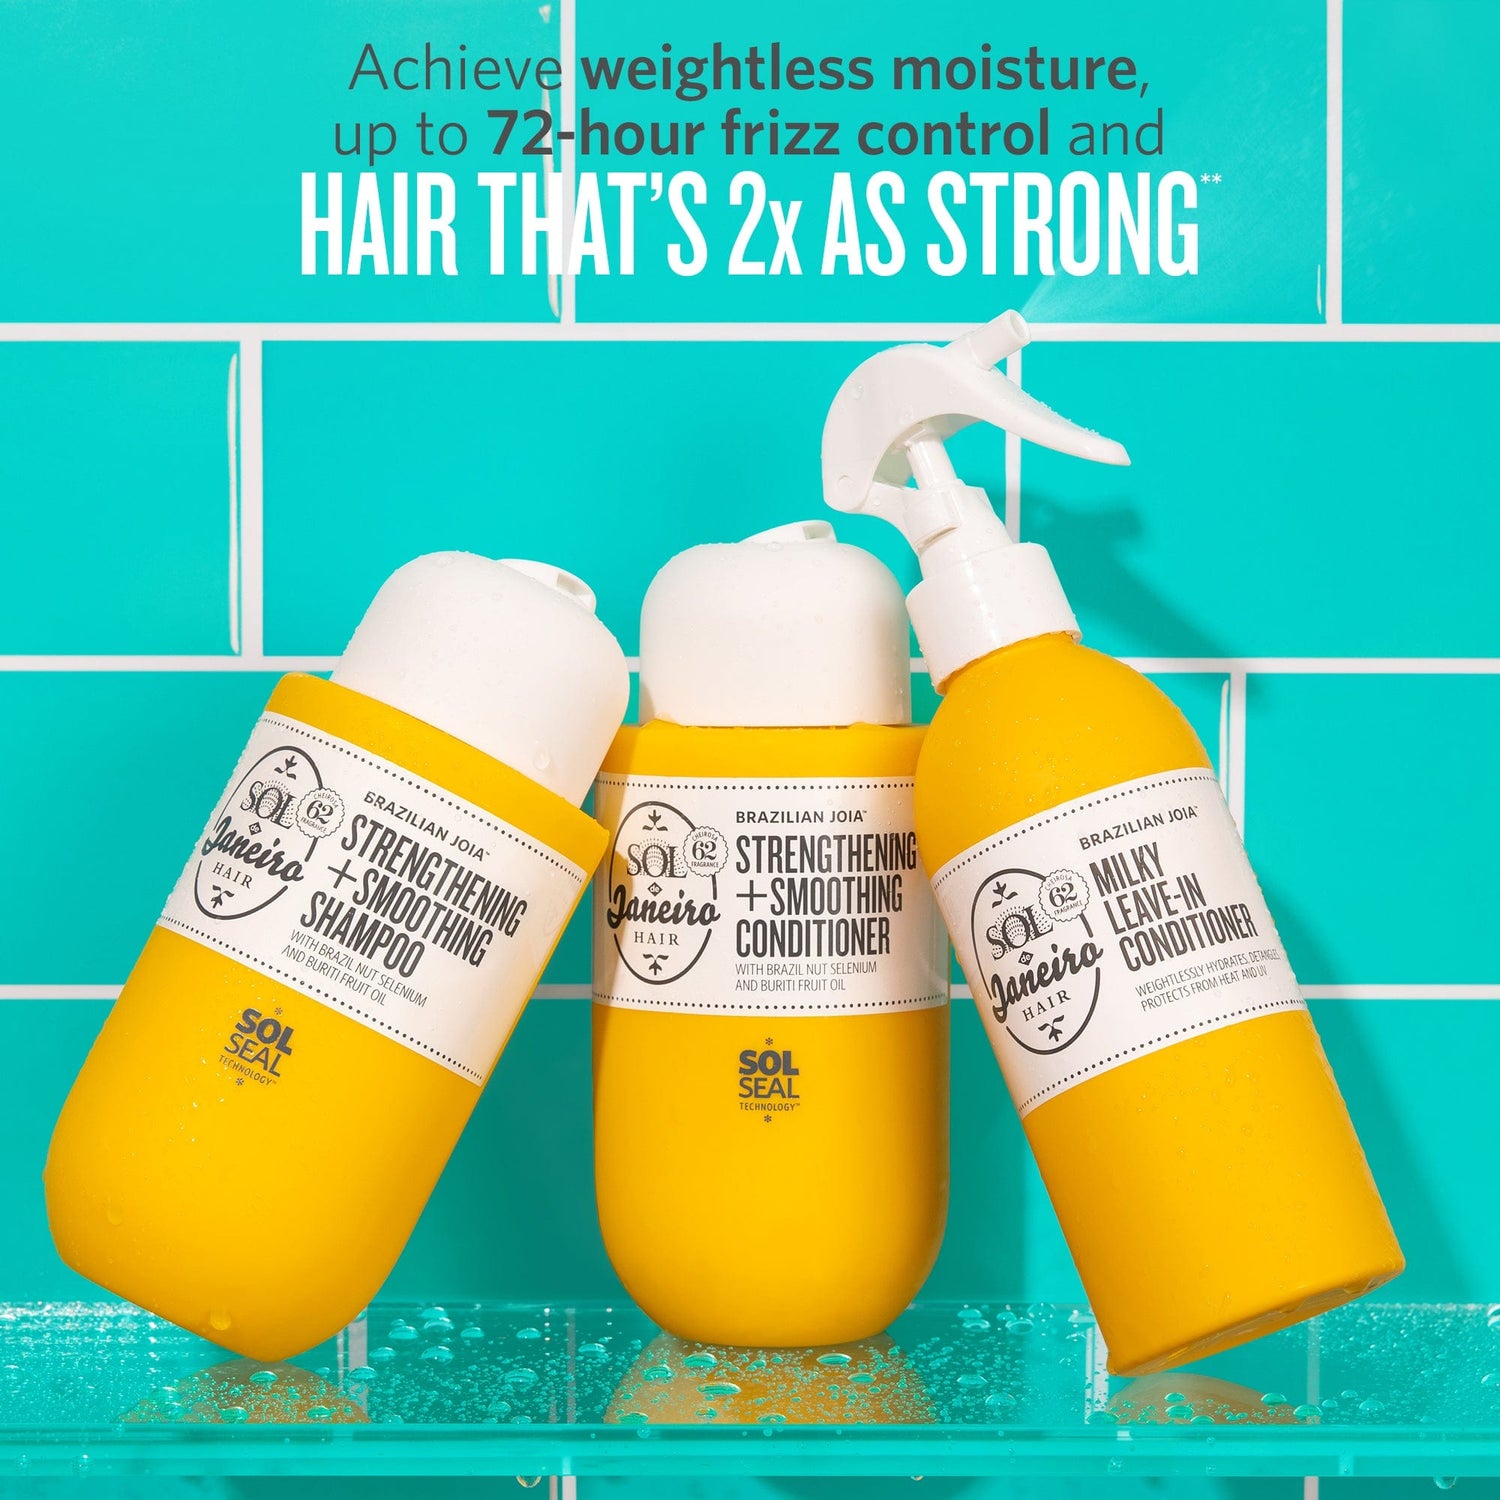 Achieve weightless moisture up to 72-hour frizz control and hair that&